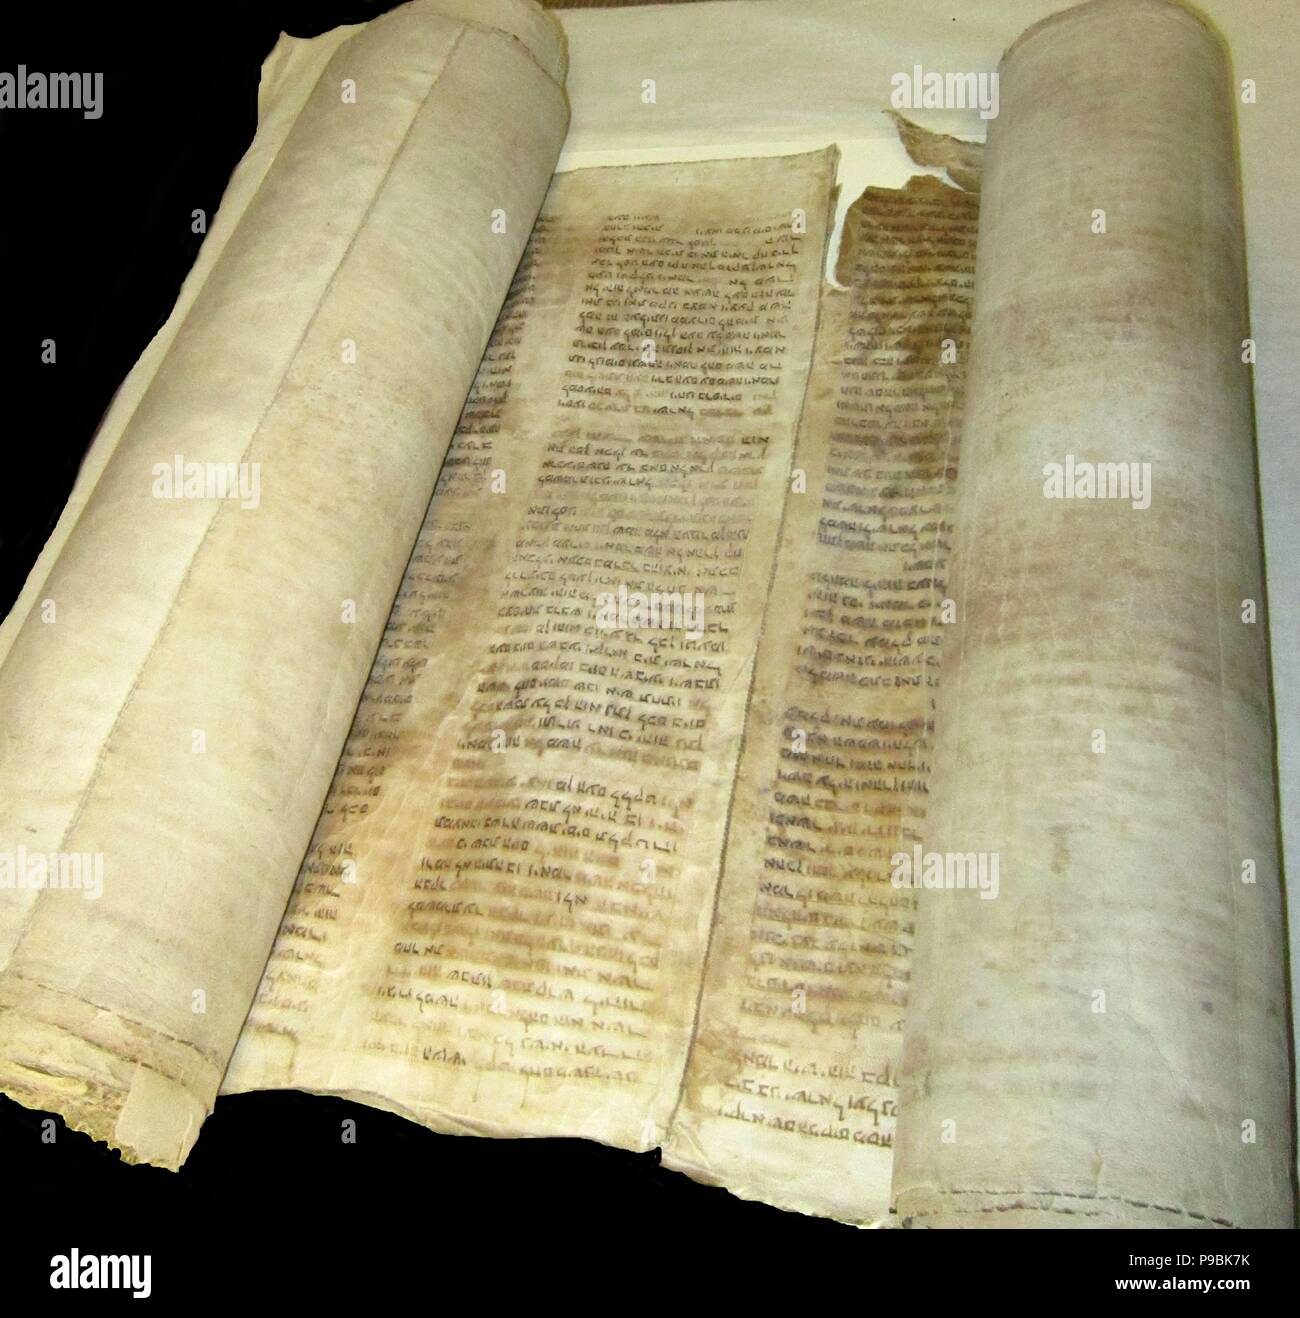 Torah scroll of the Jewish community in Kaifeng, China. Museum: American Bible Society. Stock Photo